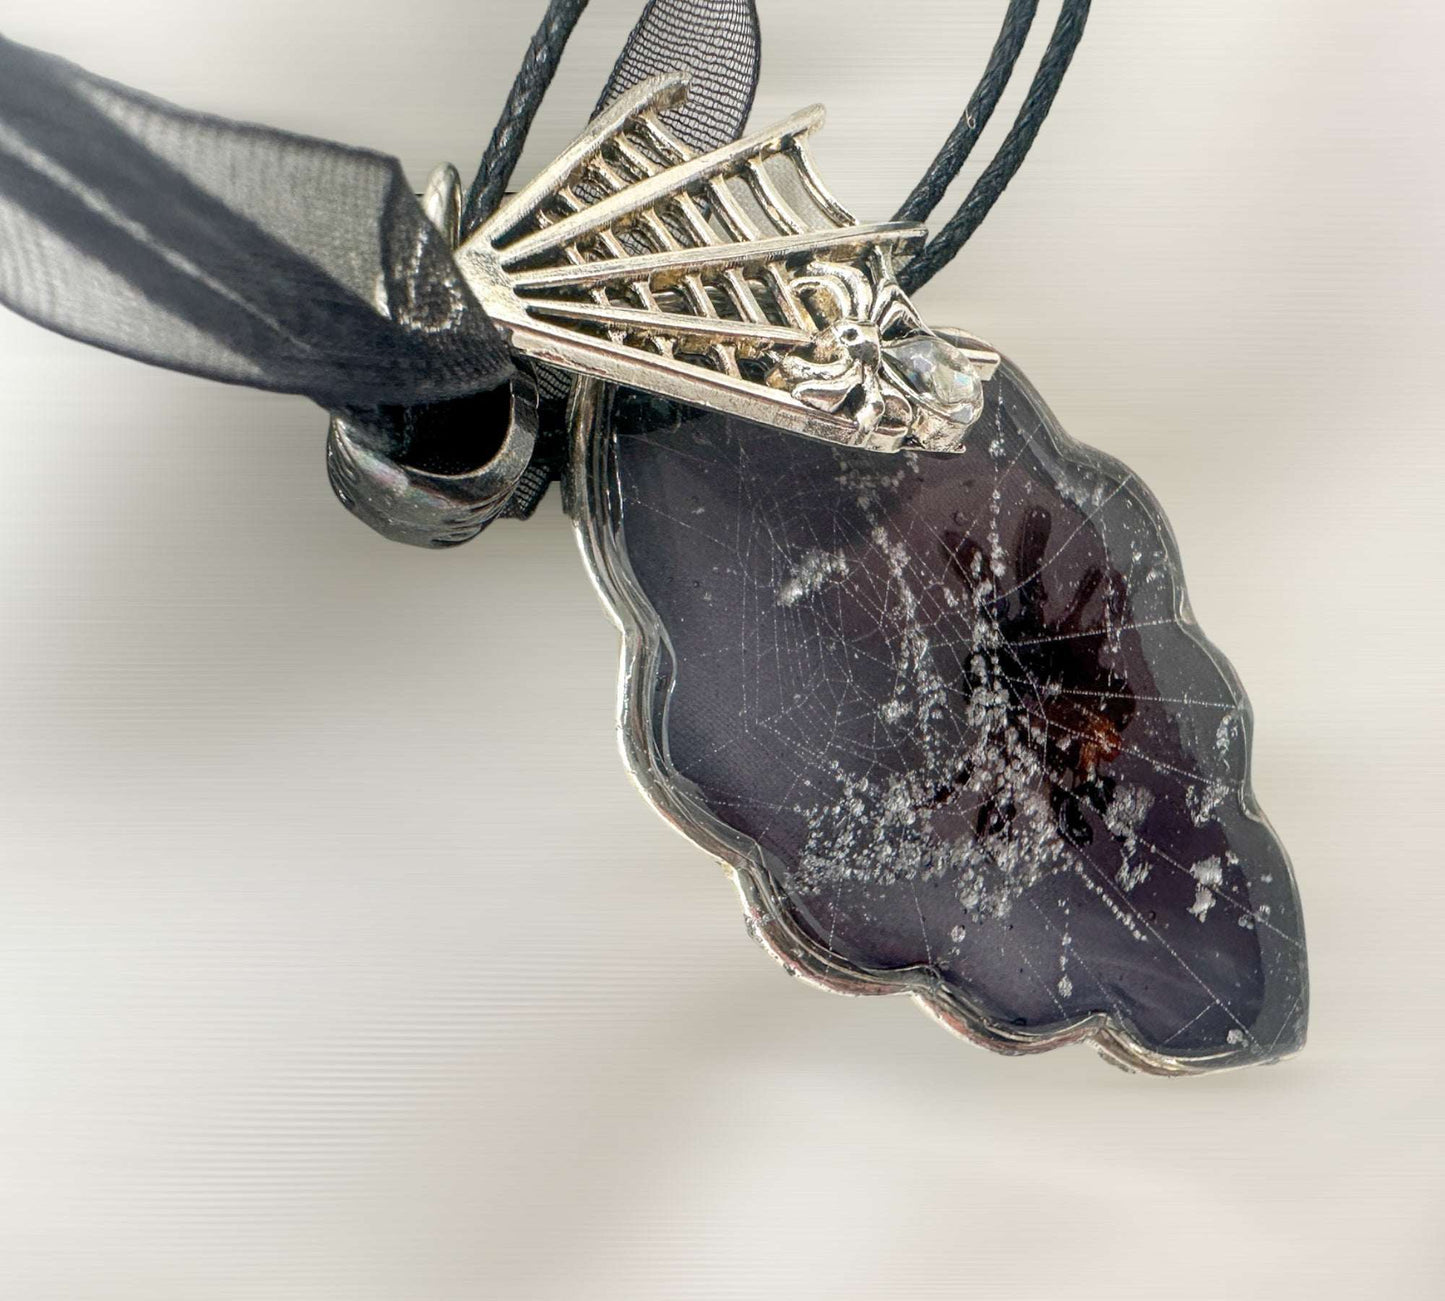 Spiderweb Nature-inspired Necklace- Nature's Beauty on Display